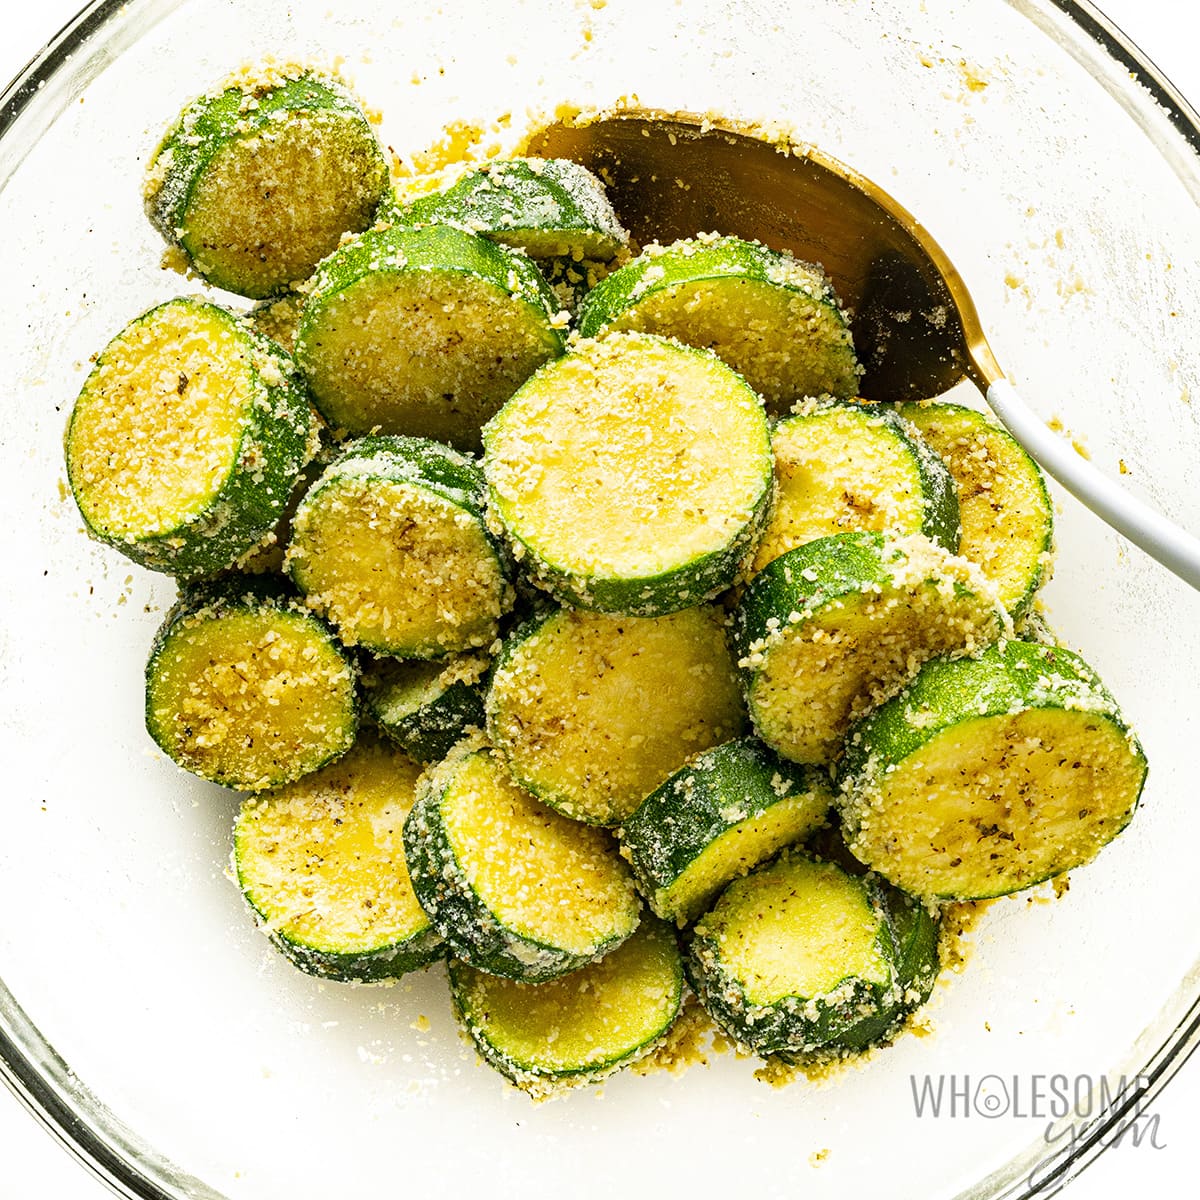 Zucchini sprinkled with grated parmesan in a bowl.